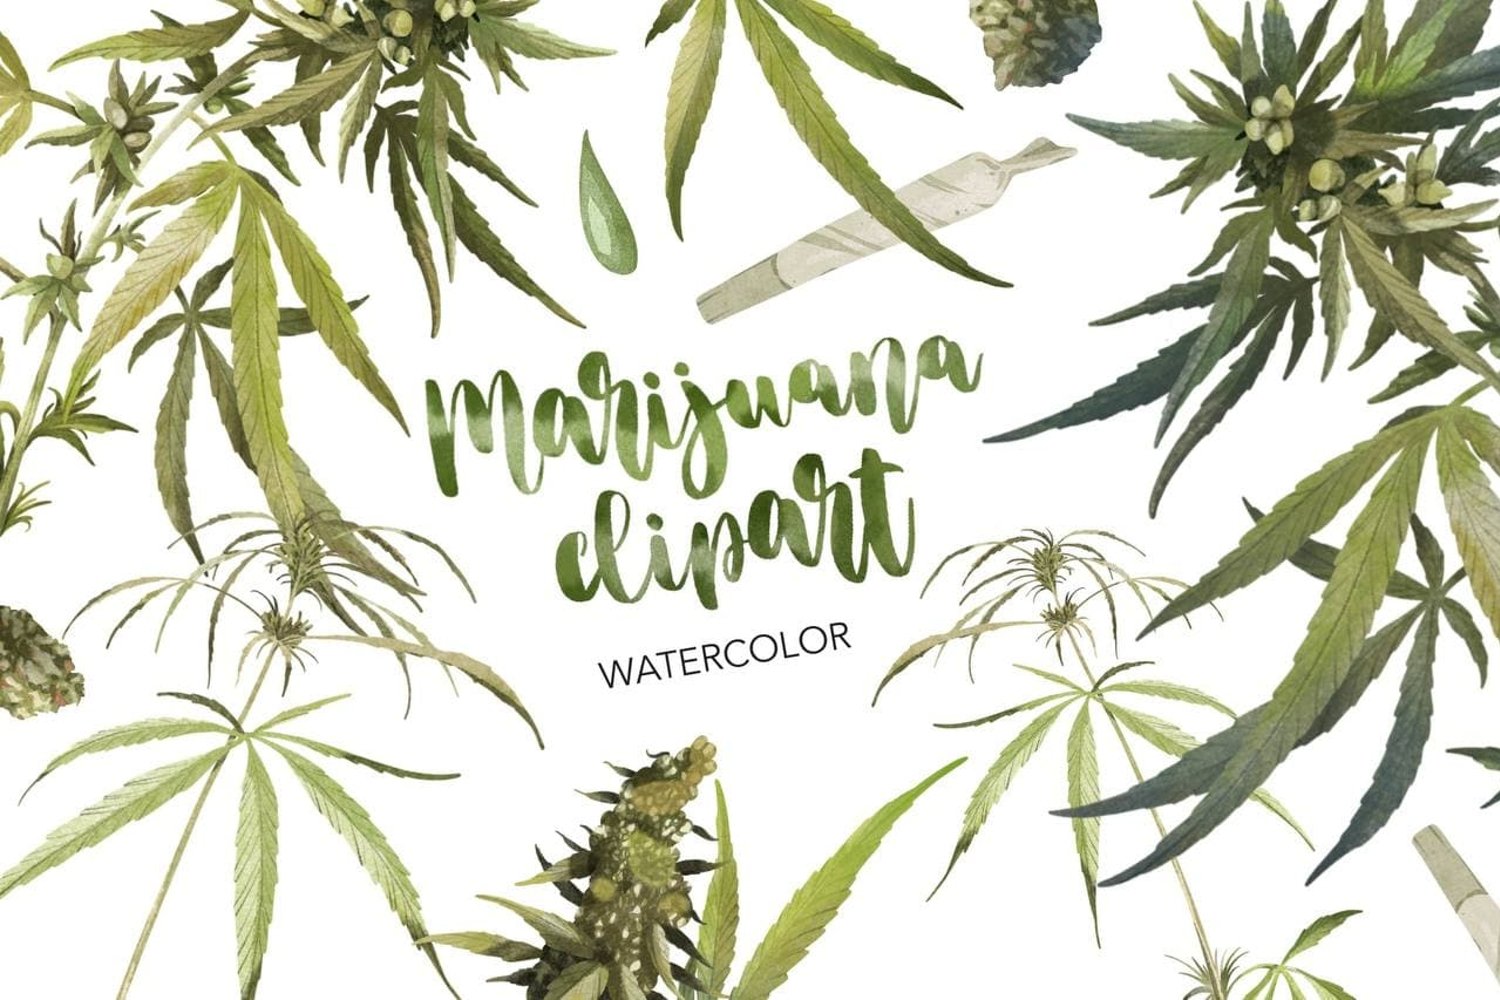 Cover image of Watercolor Cannabis.